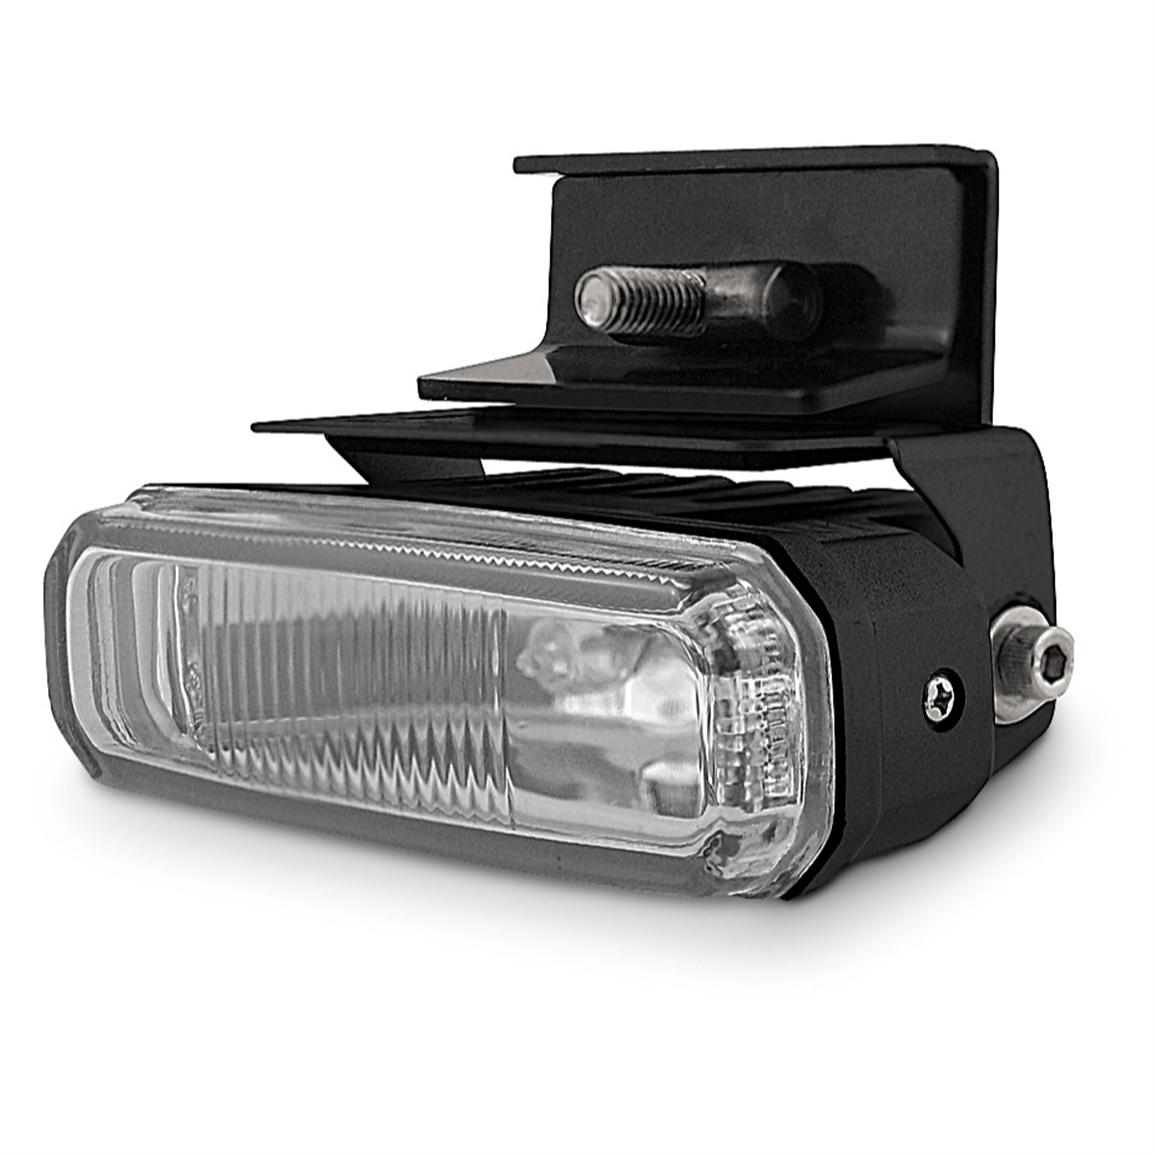 Bully Backup Light 202372, Accessories at Sportsman's Guide